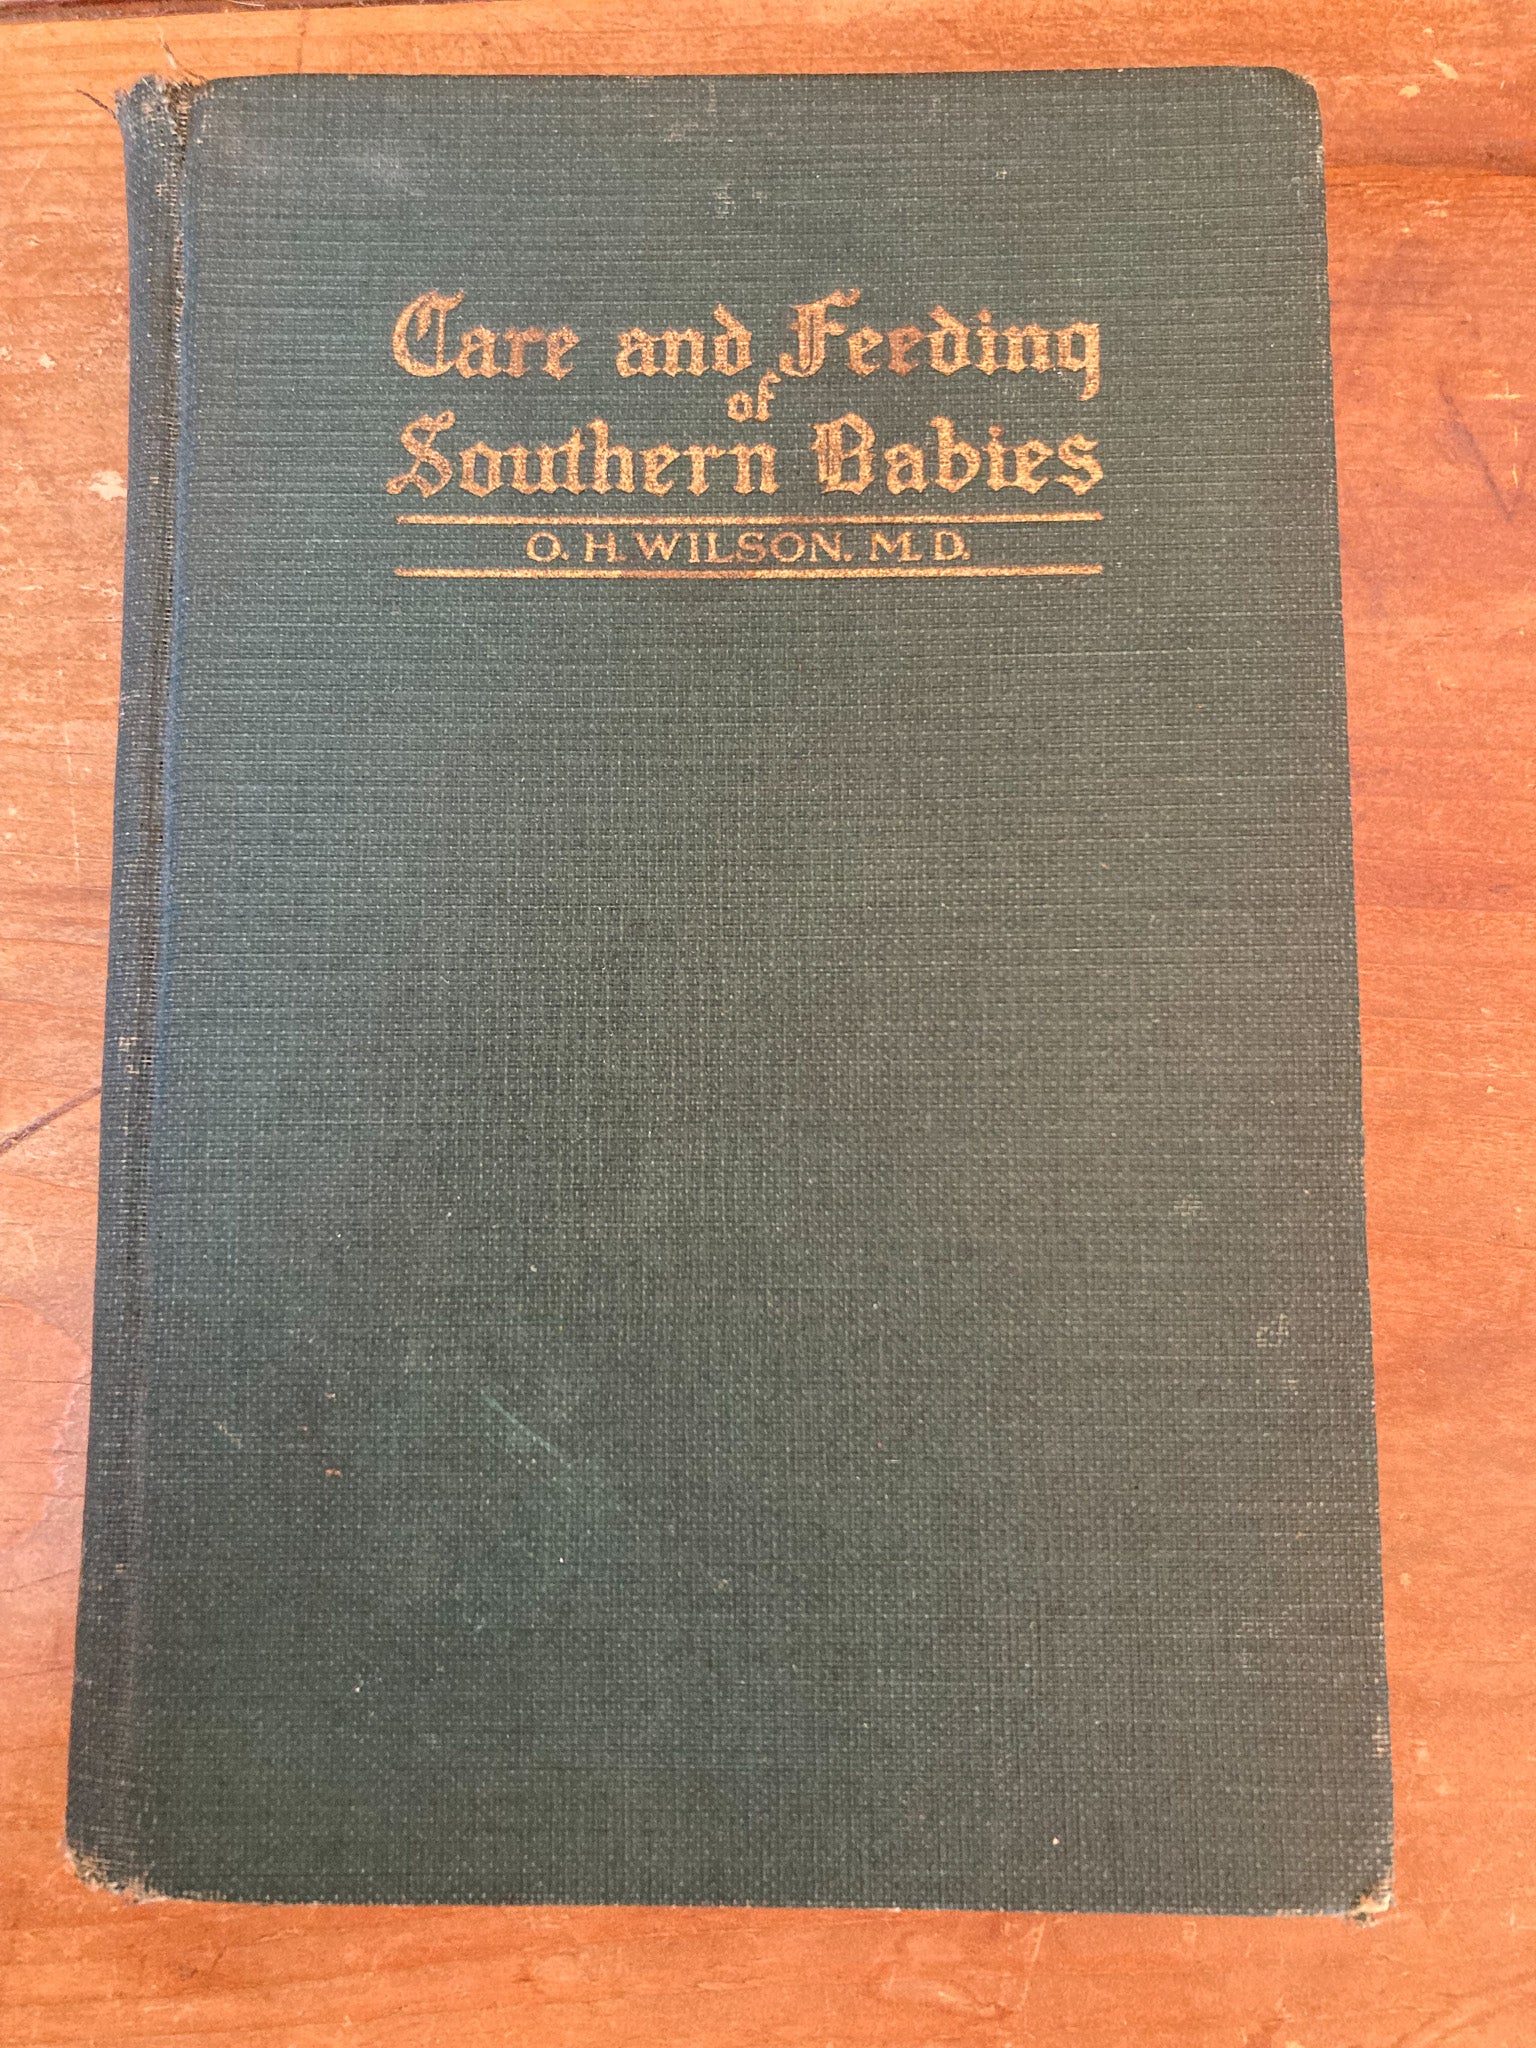 1926 Book “Care and Feeding of Southern Babies” by O.H. Wilson, MD